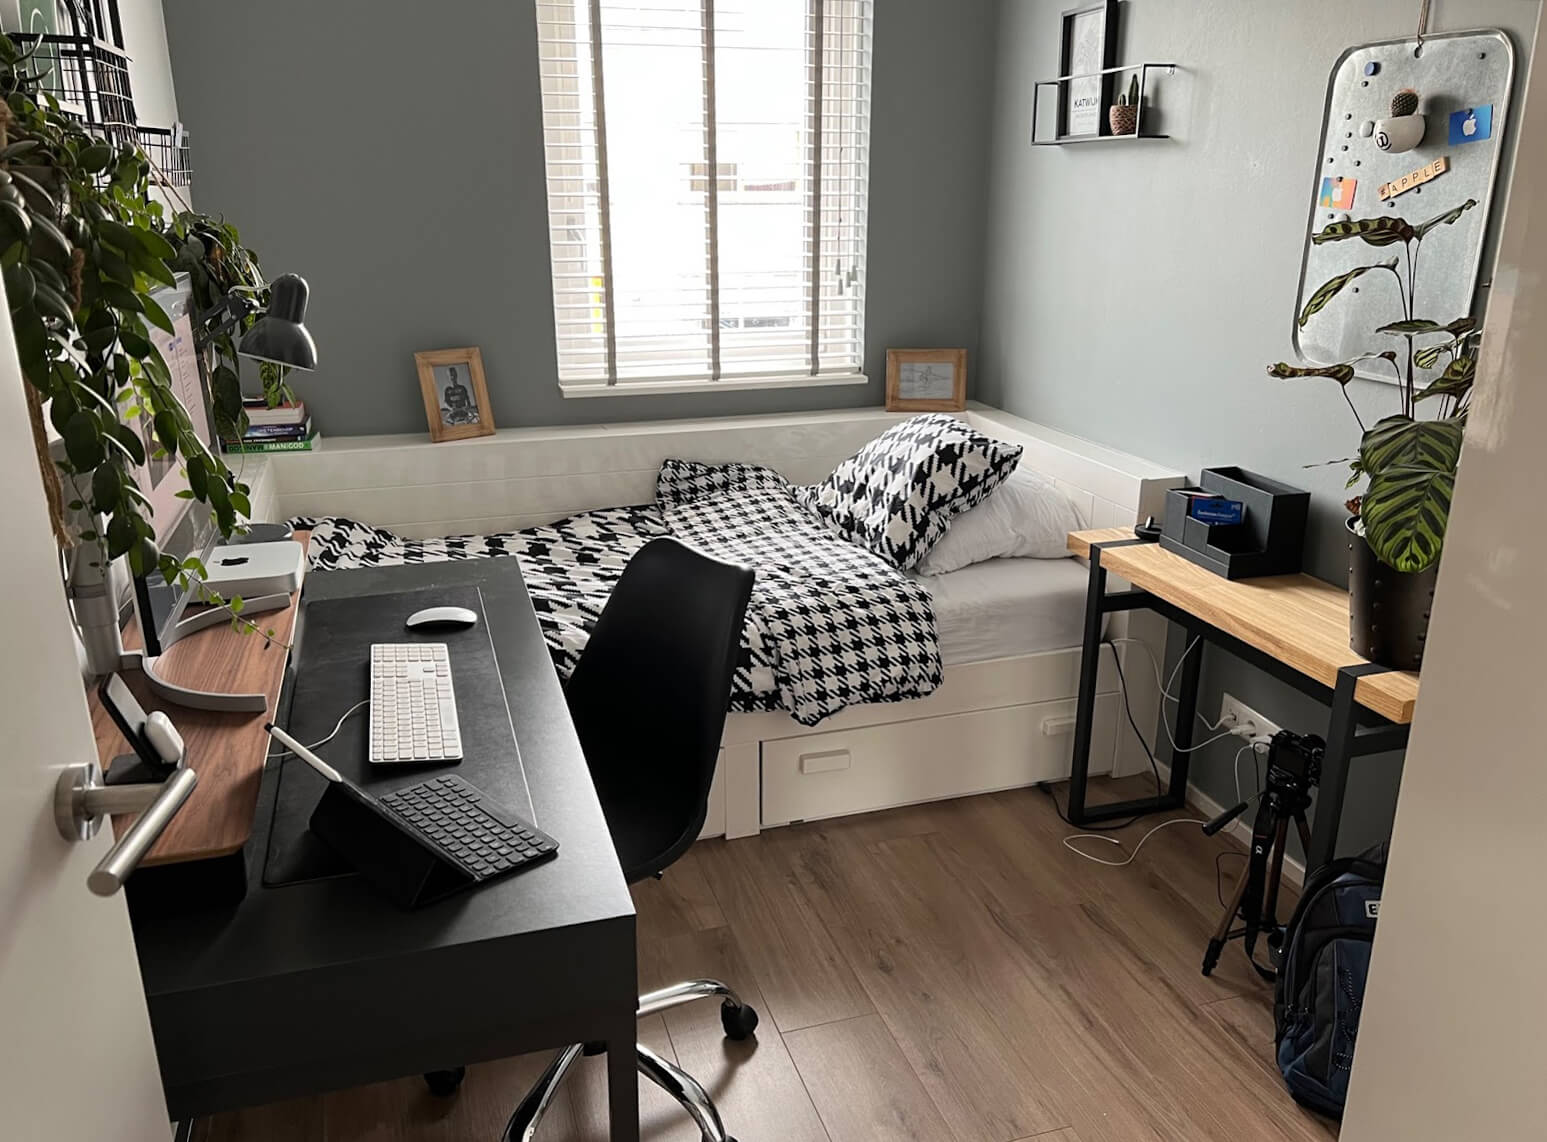 A neat, multifunctional room with a single bed covered in a black and white patterned comforter next to a window with blinds. In front of the bed is a black desk with a white keyboard, tablet, and lamp, complemented by a black office chair